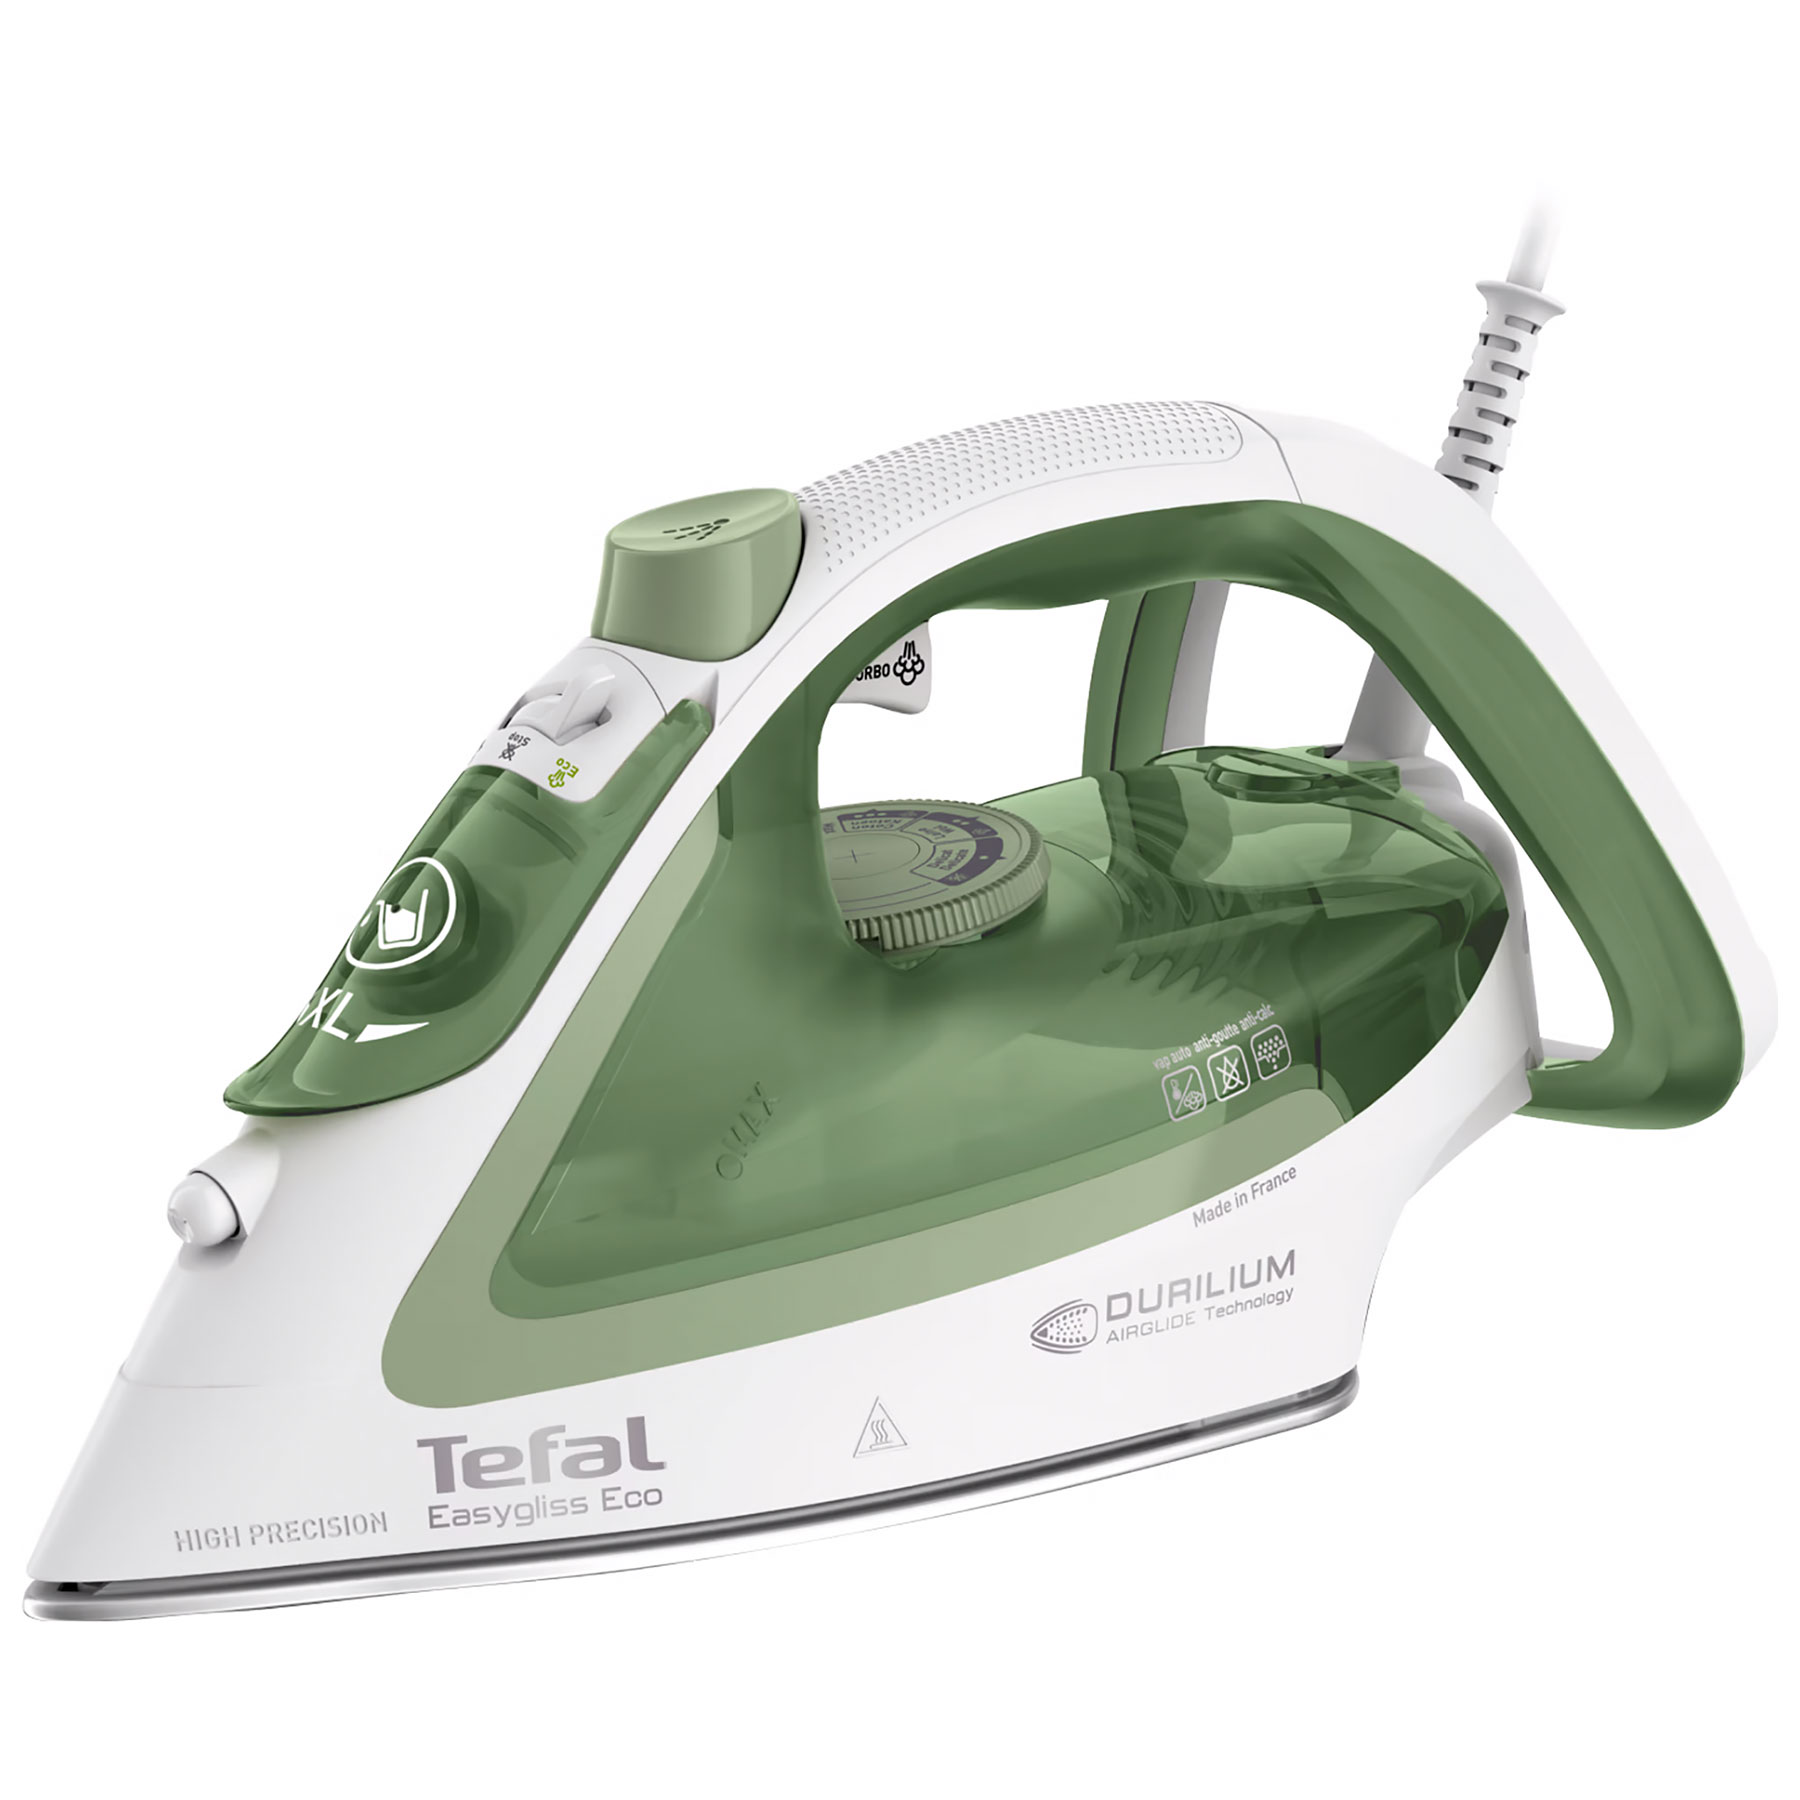 Tefal FV5781G0 Easygliss Eco Steam Iron in White and Green 2800W